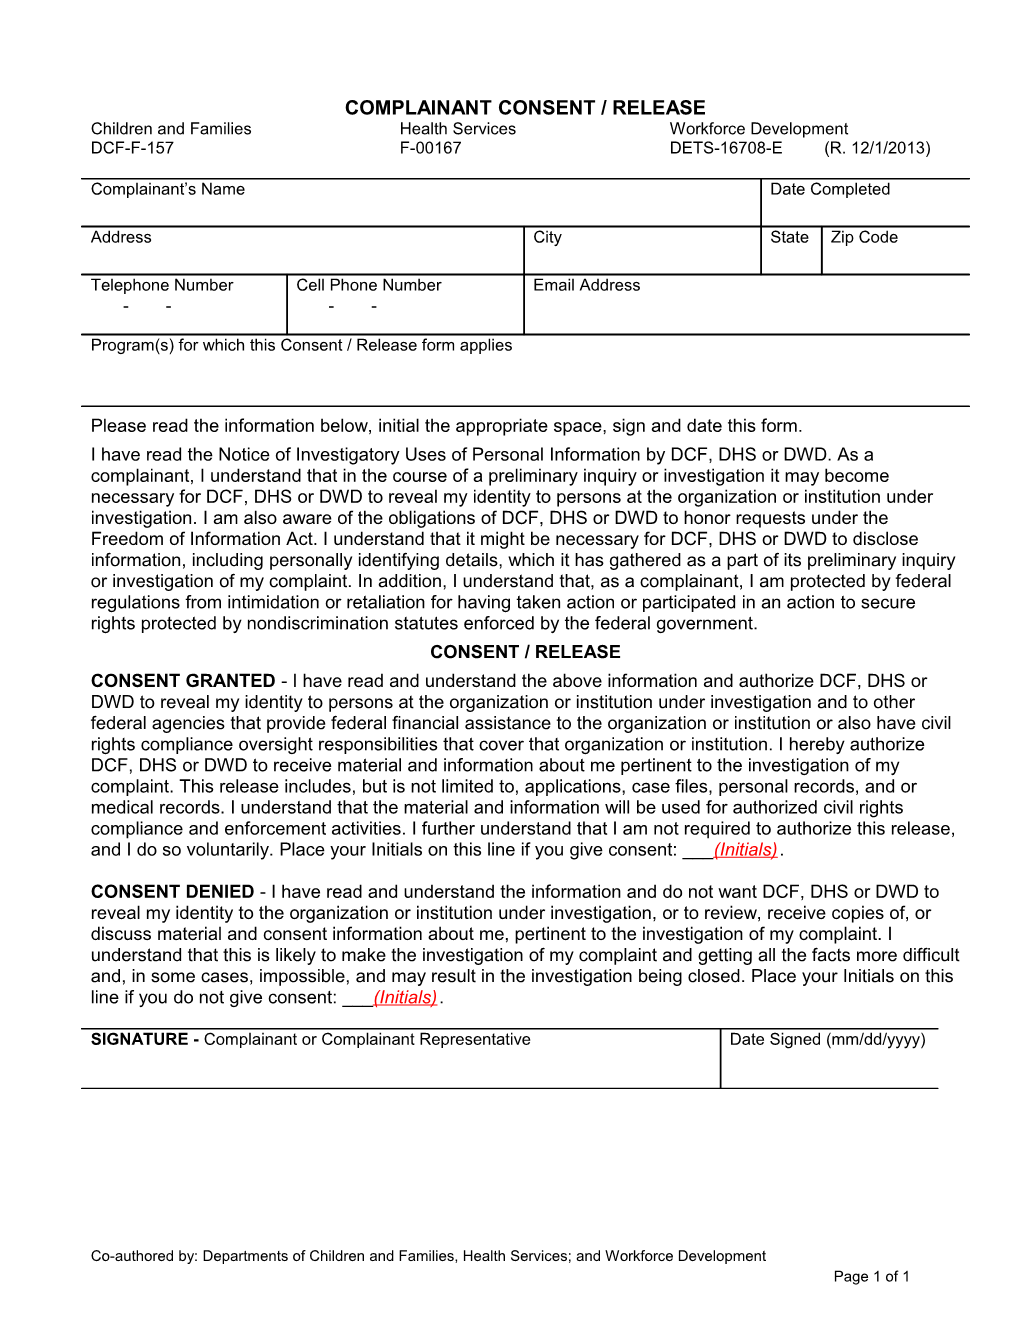 Complainant Consent / Release Form